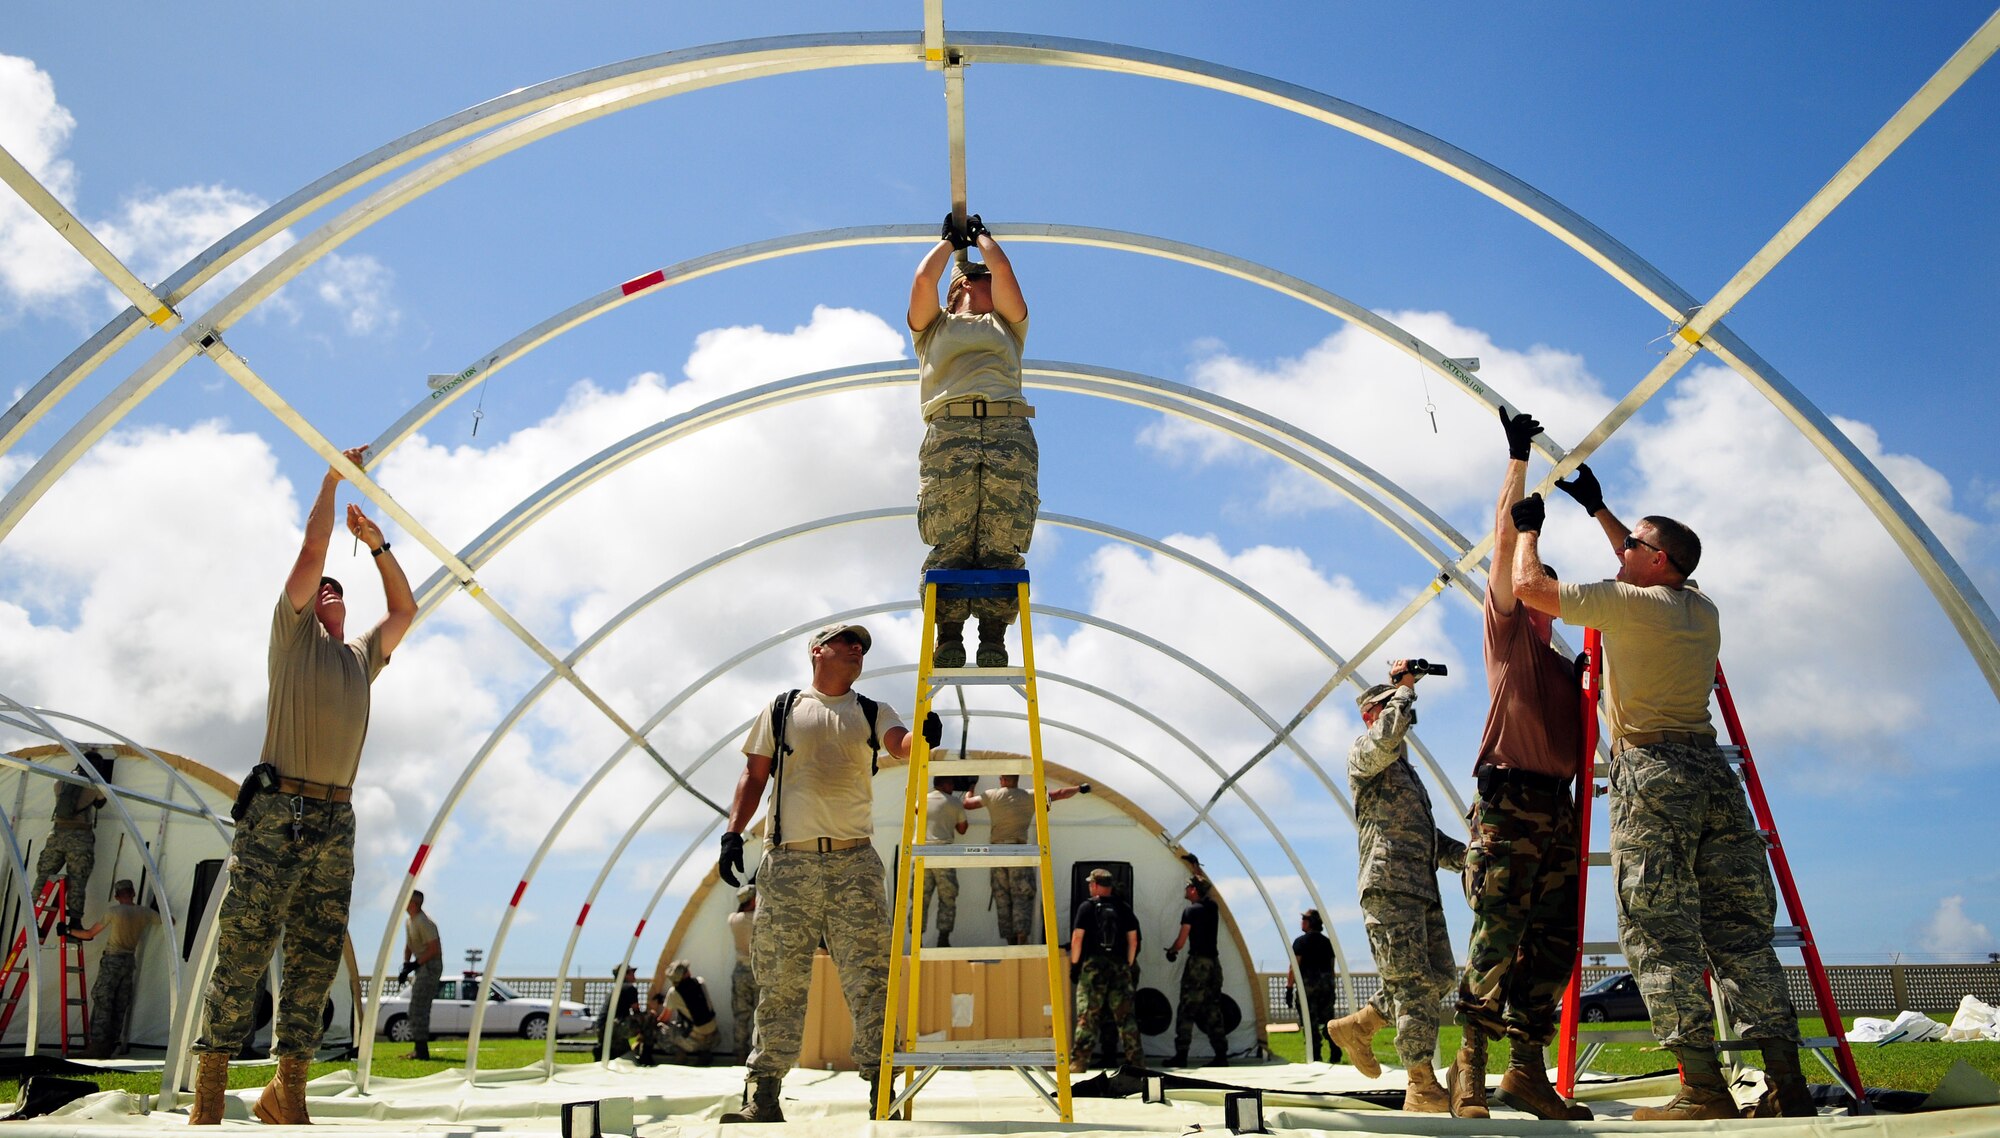 ANDERSEN AIR FORCE BASE, Guam - The 36th Medical Group and the 36th Contingency Response Group work together to construct operational tents during a simulated exercise for the Humanitarian Assistance Rapid Response Team here July 15. The HARRT is equipped to operate in an austere permissive environment during Phase III of disaster relief operations, supporting 350 to 500 patients per day and can be fully operational within six hours of arrival at the disaster site. (U.S. Air Force photo by Airman 1st Class Courtney Witt)